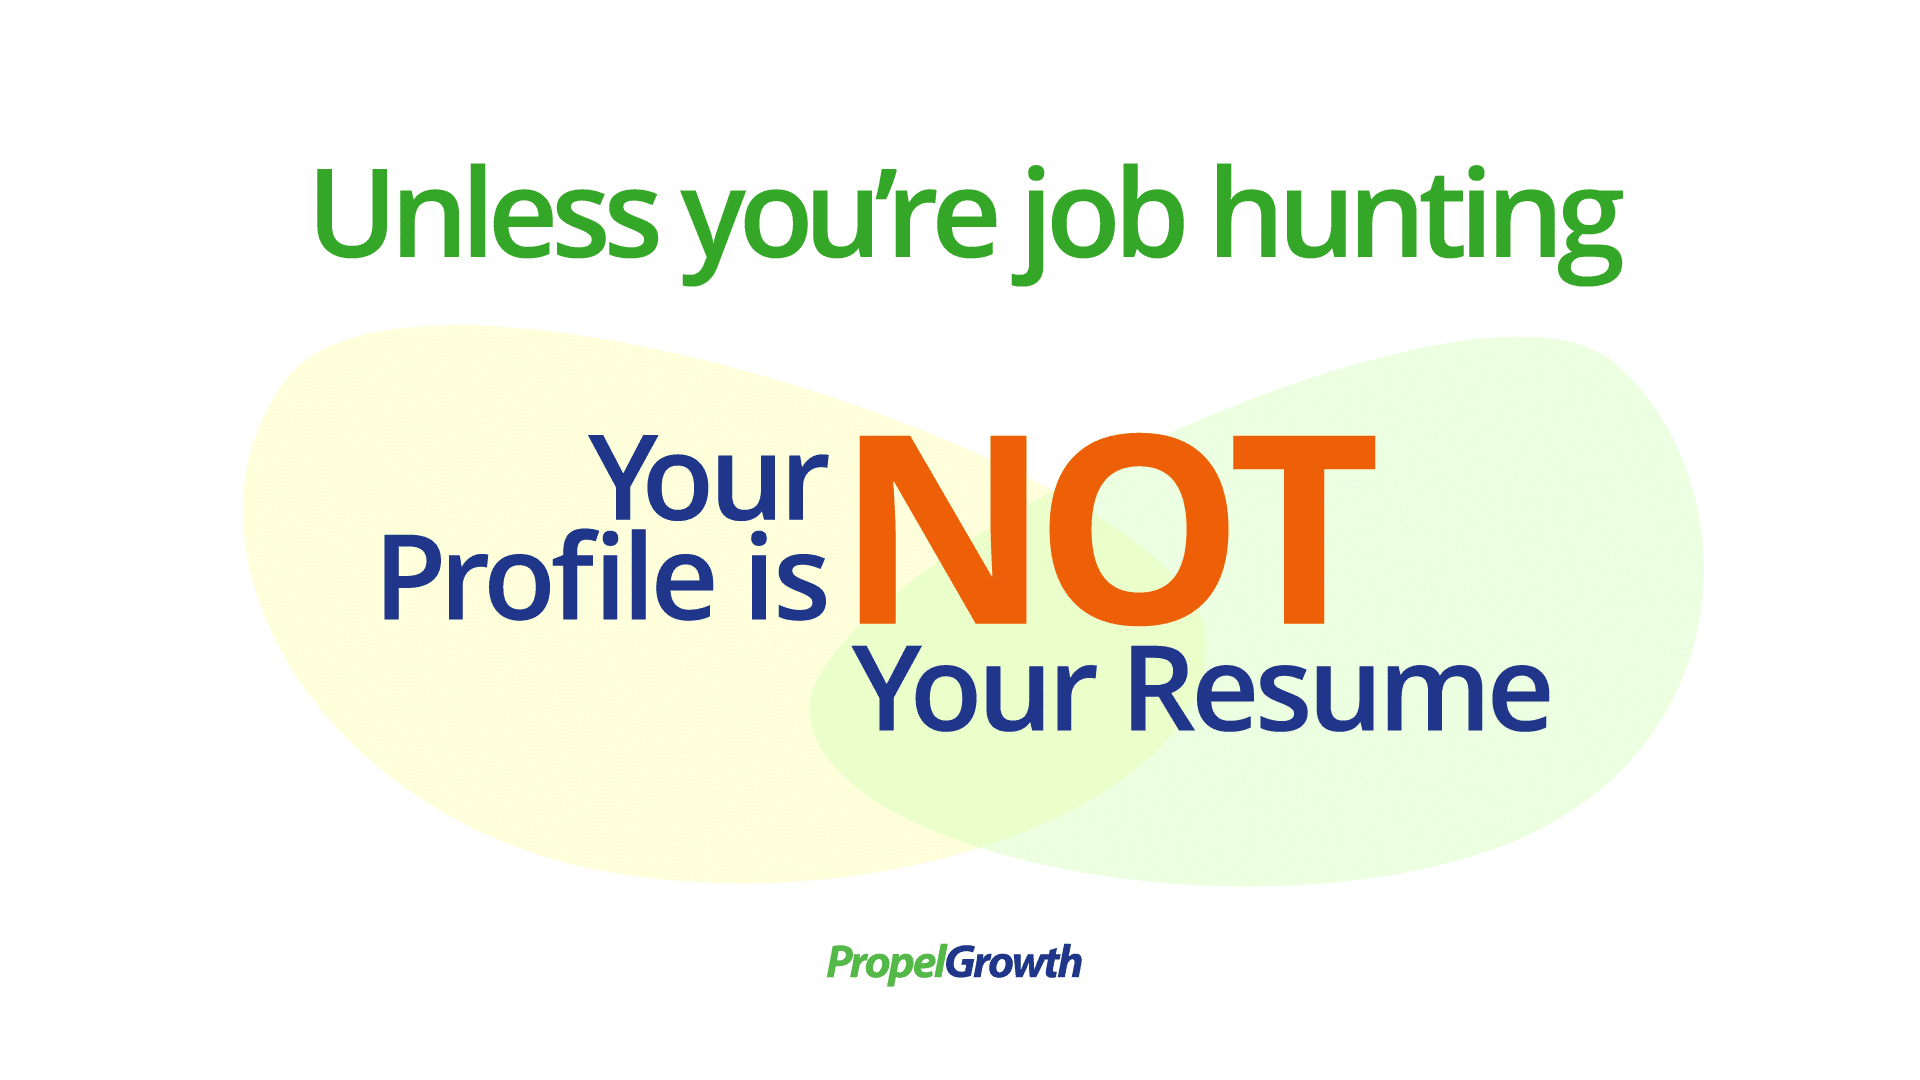 Unless you're job hunting, your profile is not your resume.